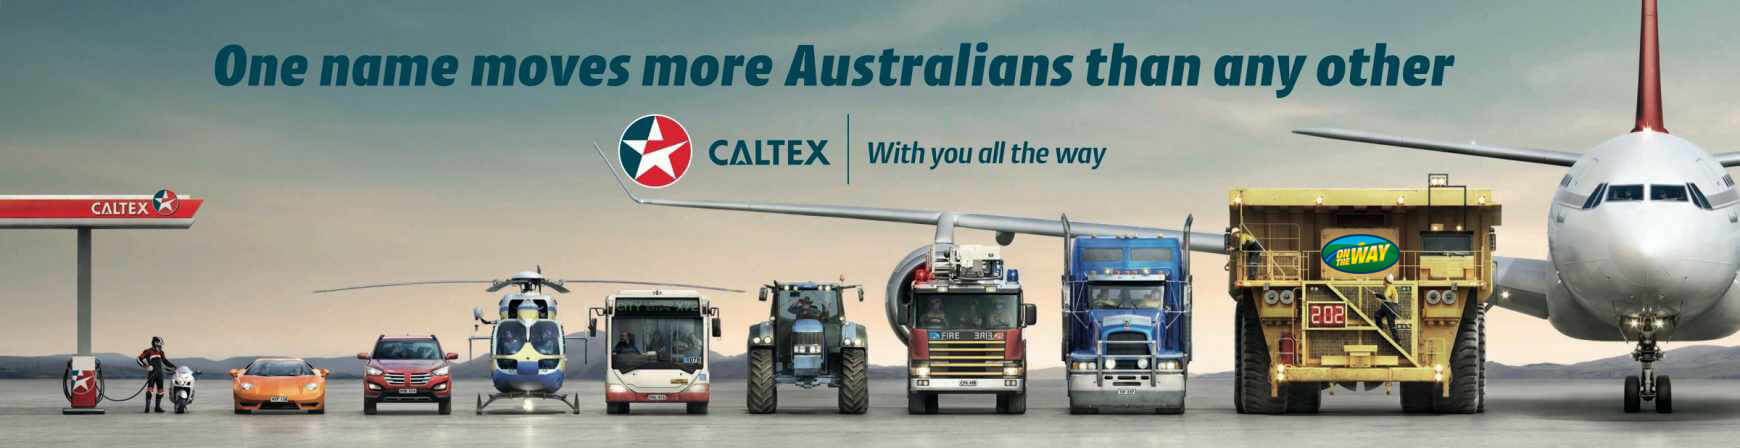 Lineup of vehicles with Caltex text